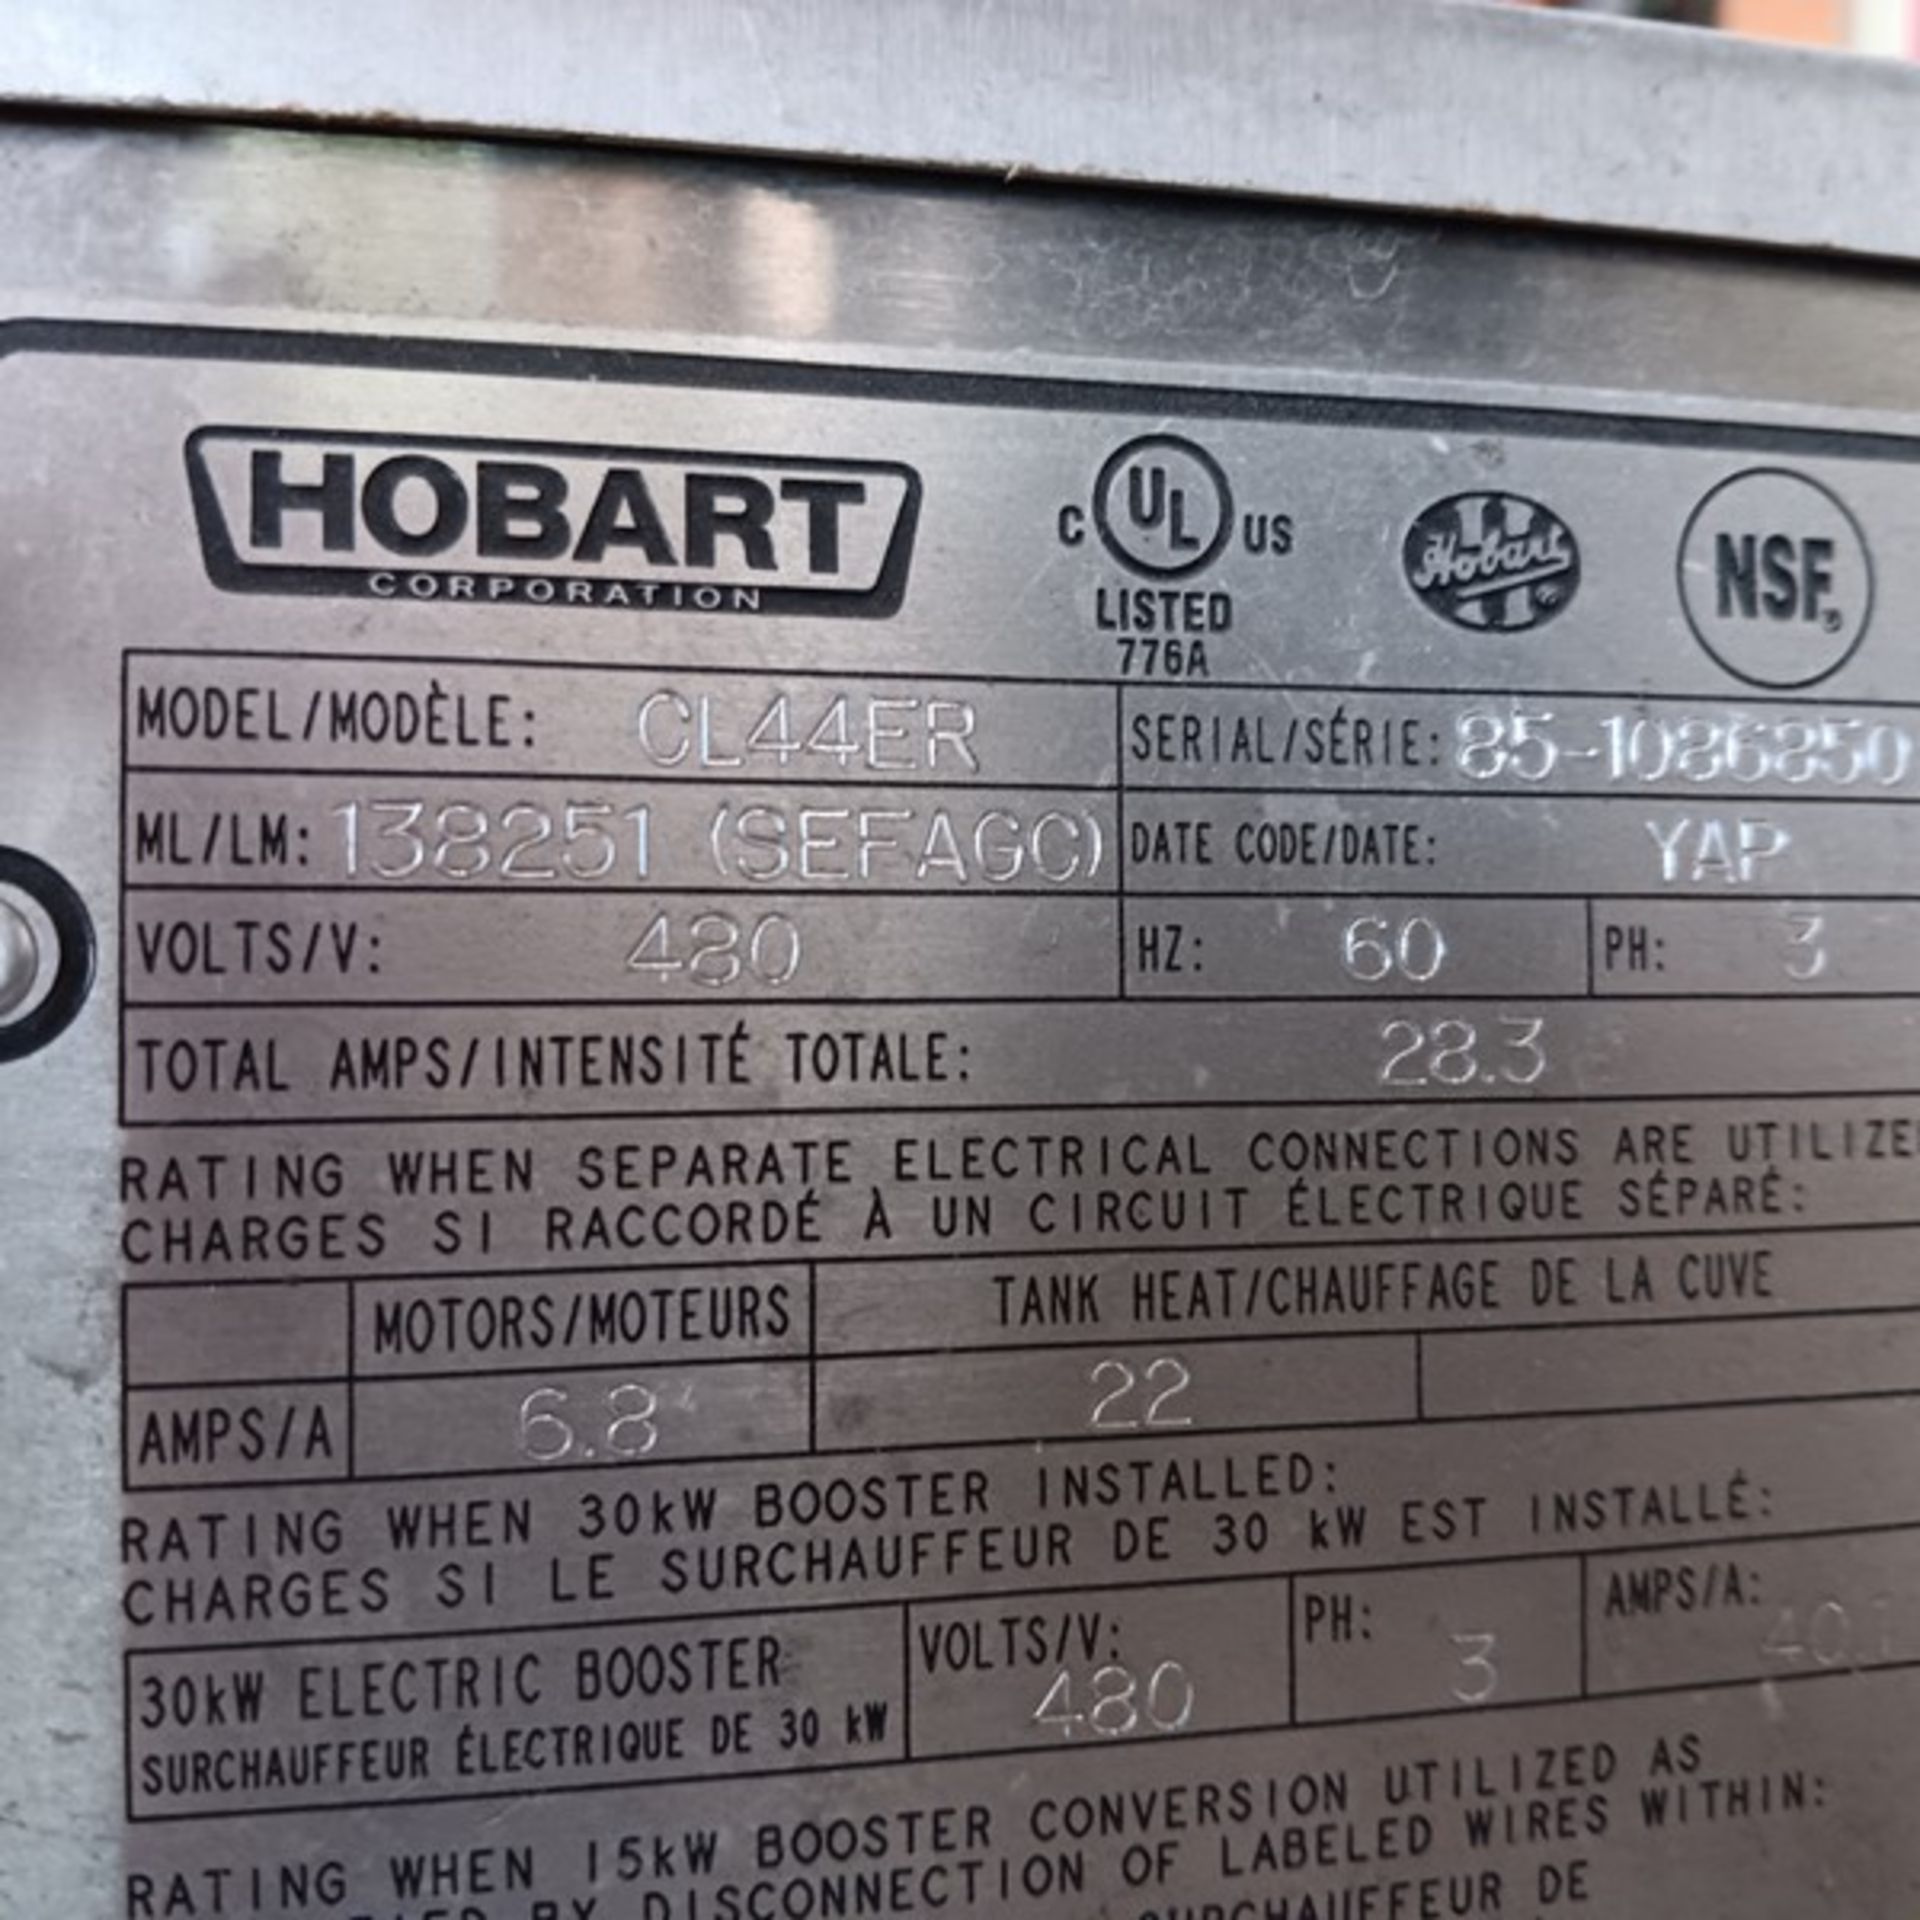 Hobart CL44ER Pass Through Dishwasher, S/N85-1086850, Volt 480, 3 Phase, Electrical Dryer (Located - Image 8 of 10